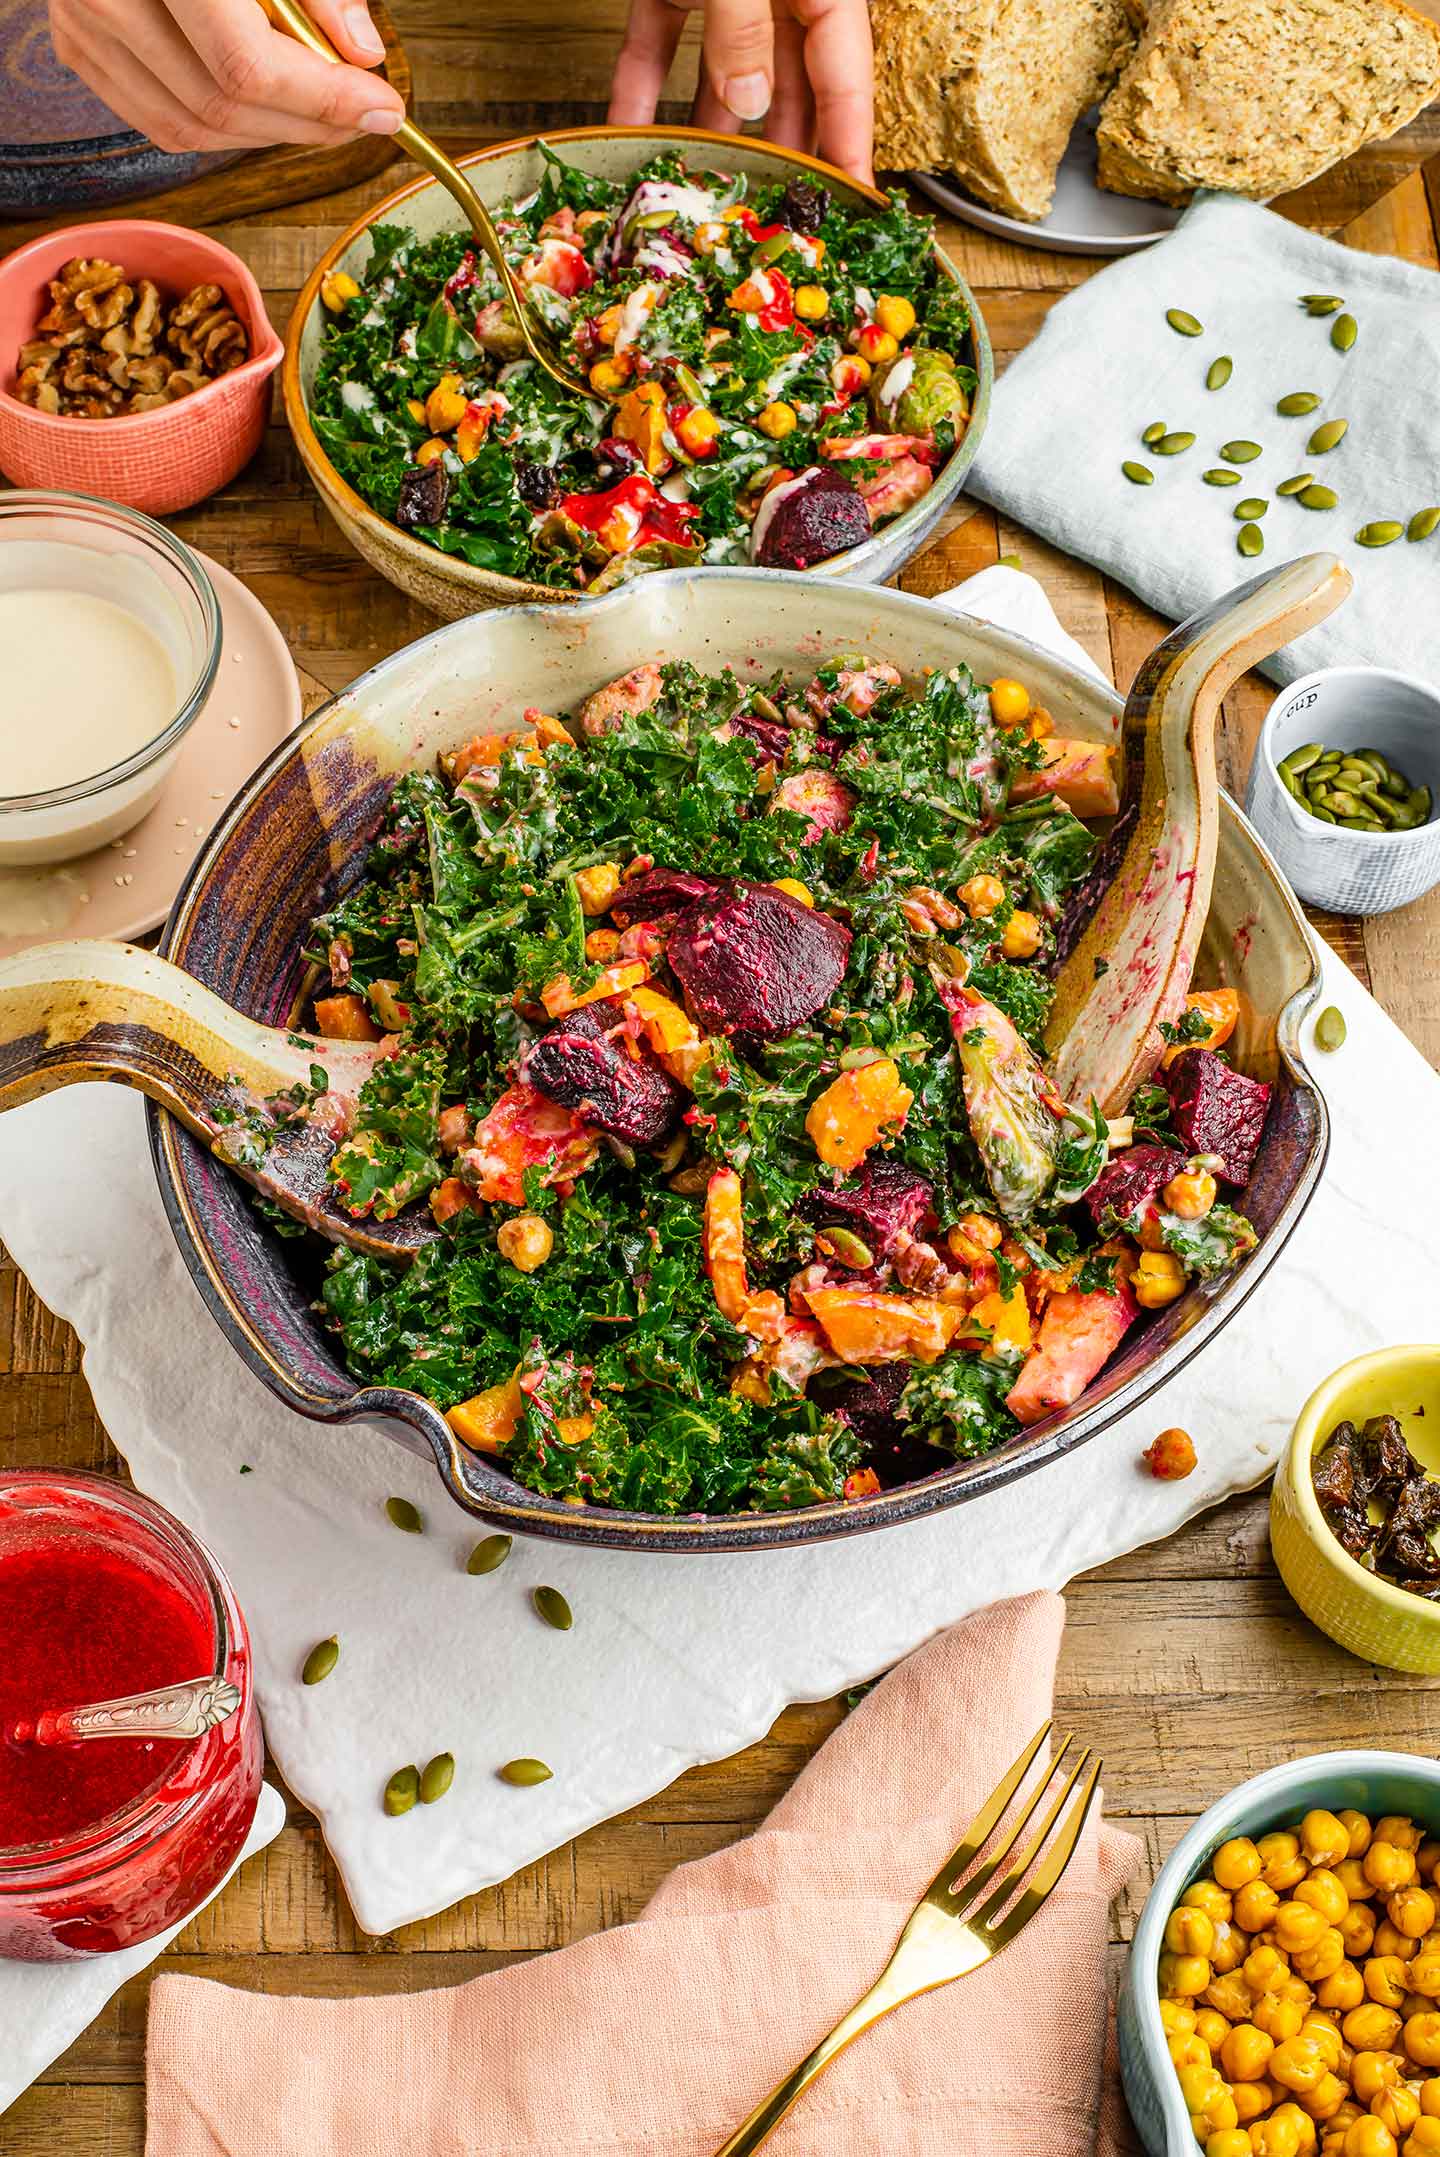 Top down view of a kale salad with roasted vegetables tossed and portioned into a smaller bowl. Ceramic tongs sit in the large salad bowl and pumpkin seeds are sprinkled around.